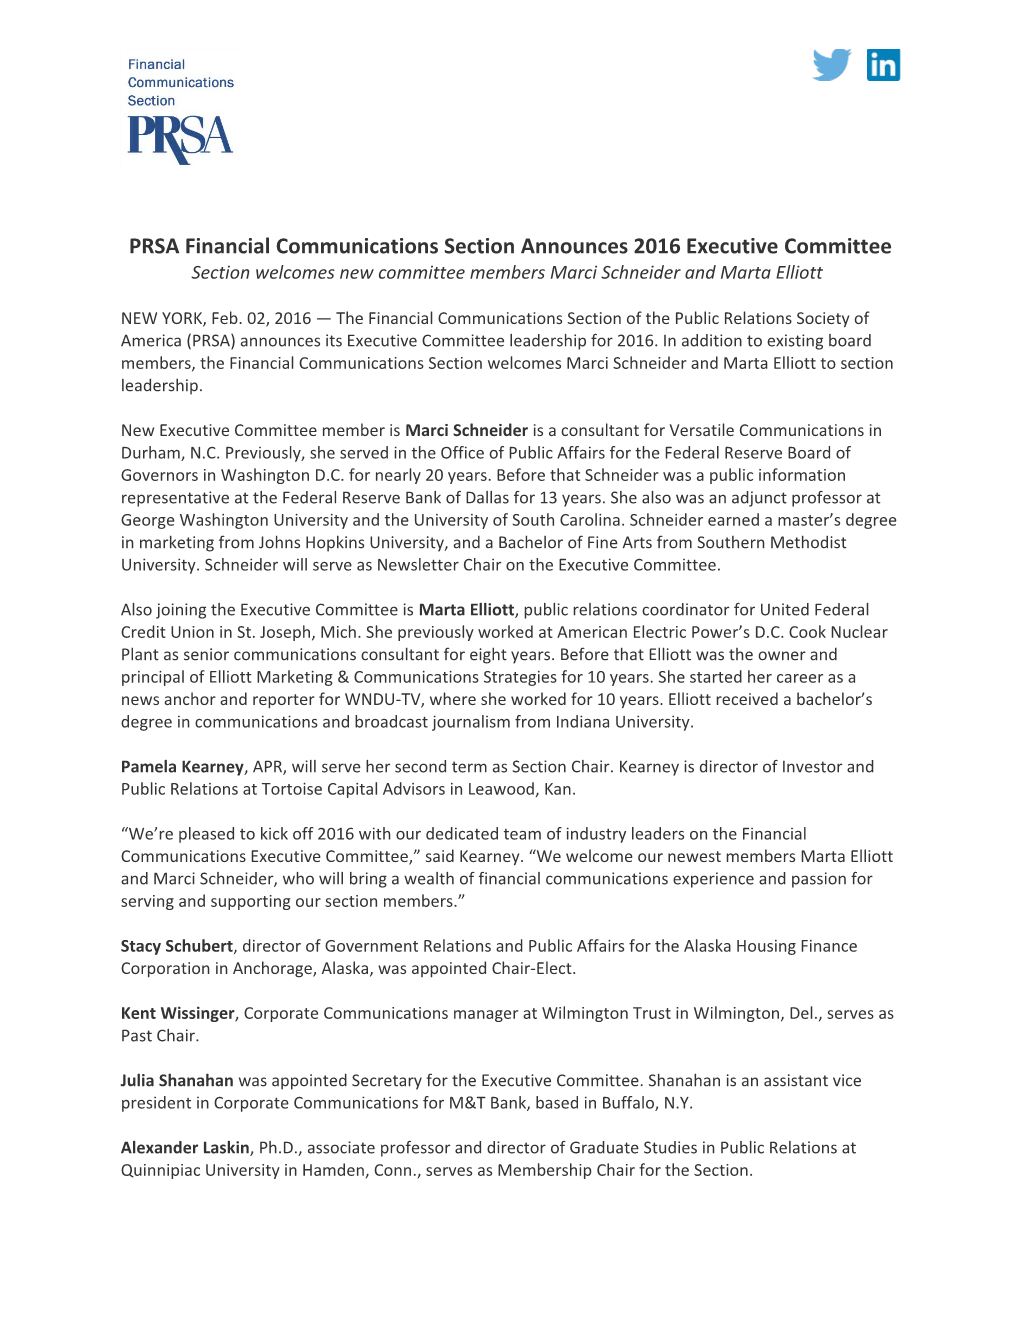 PRSA Financial Communications Section Announces 2016 Executive Committee